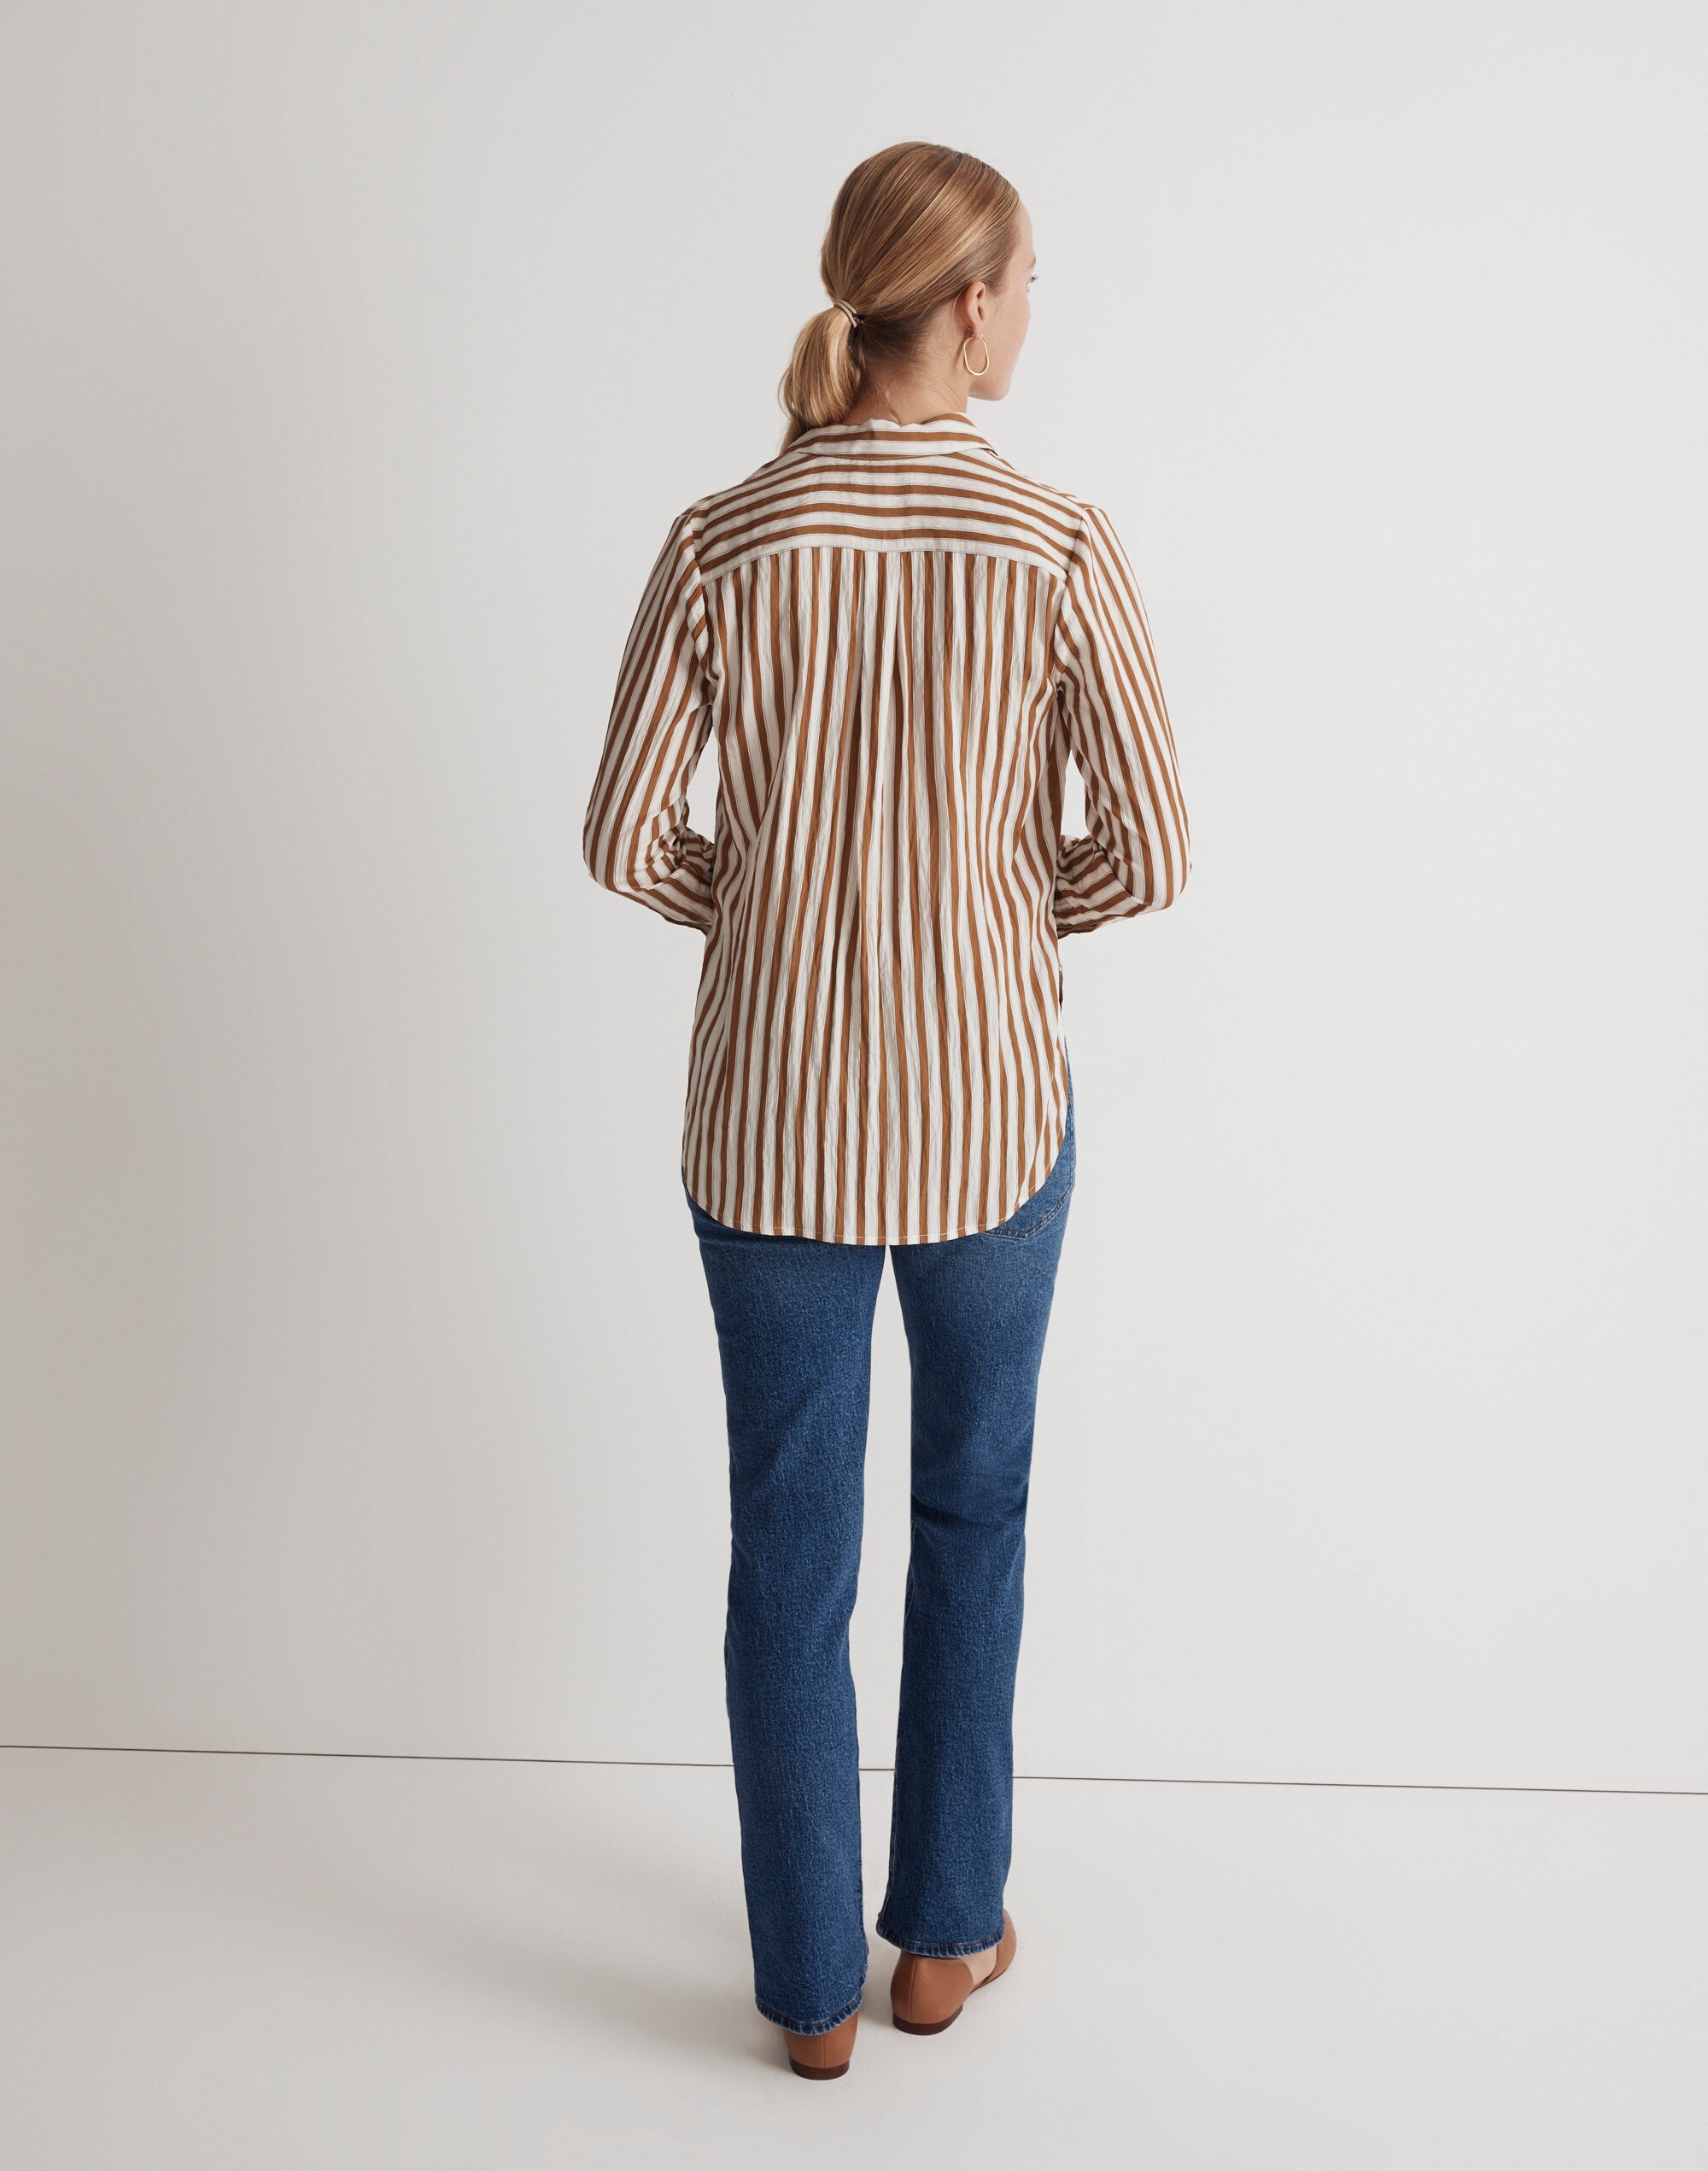 Crinkled Button-Up Shirt in Stripe